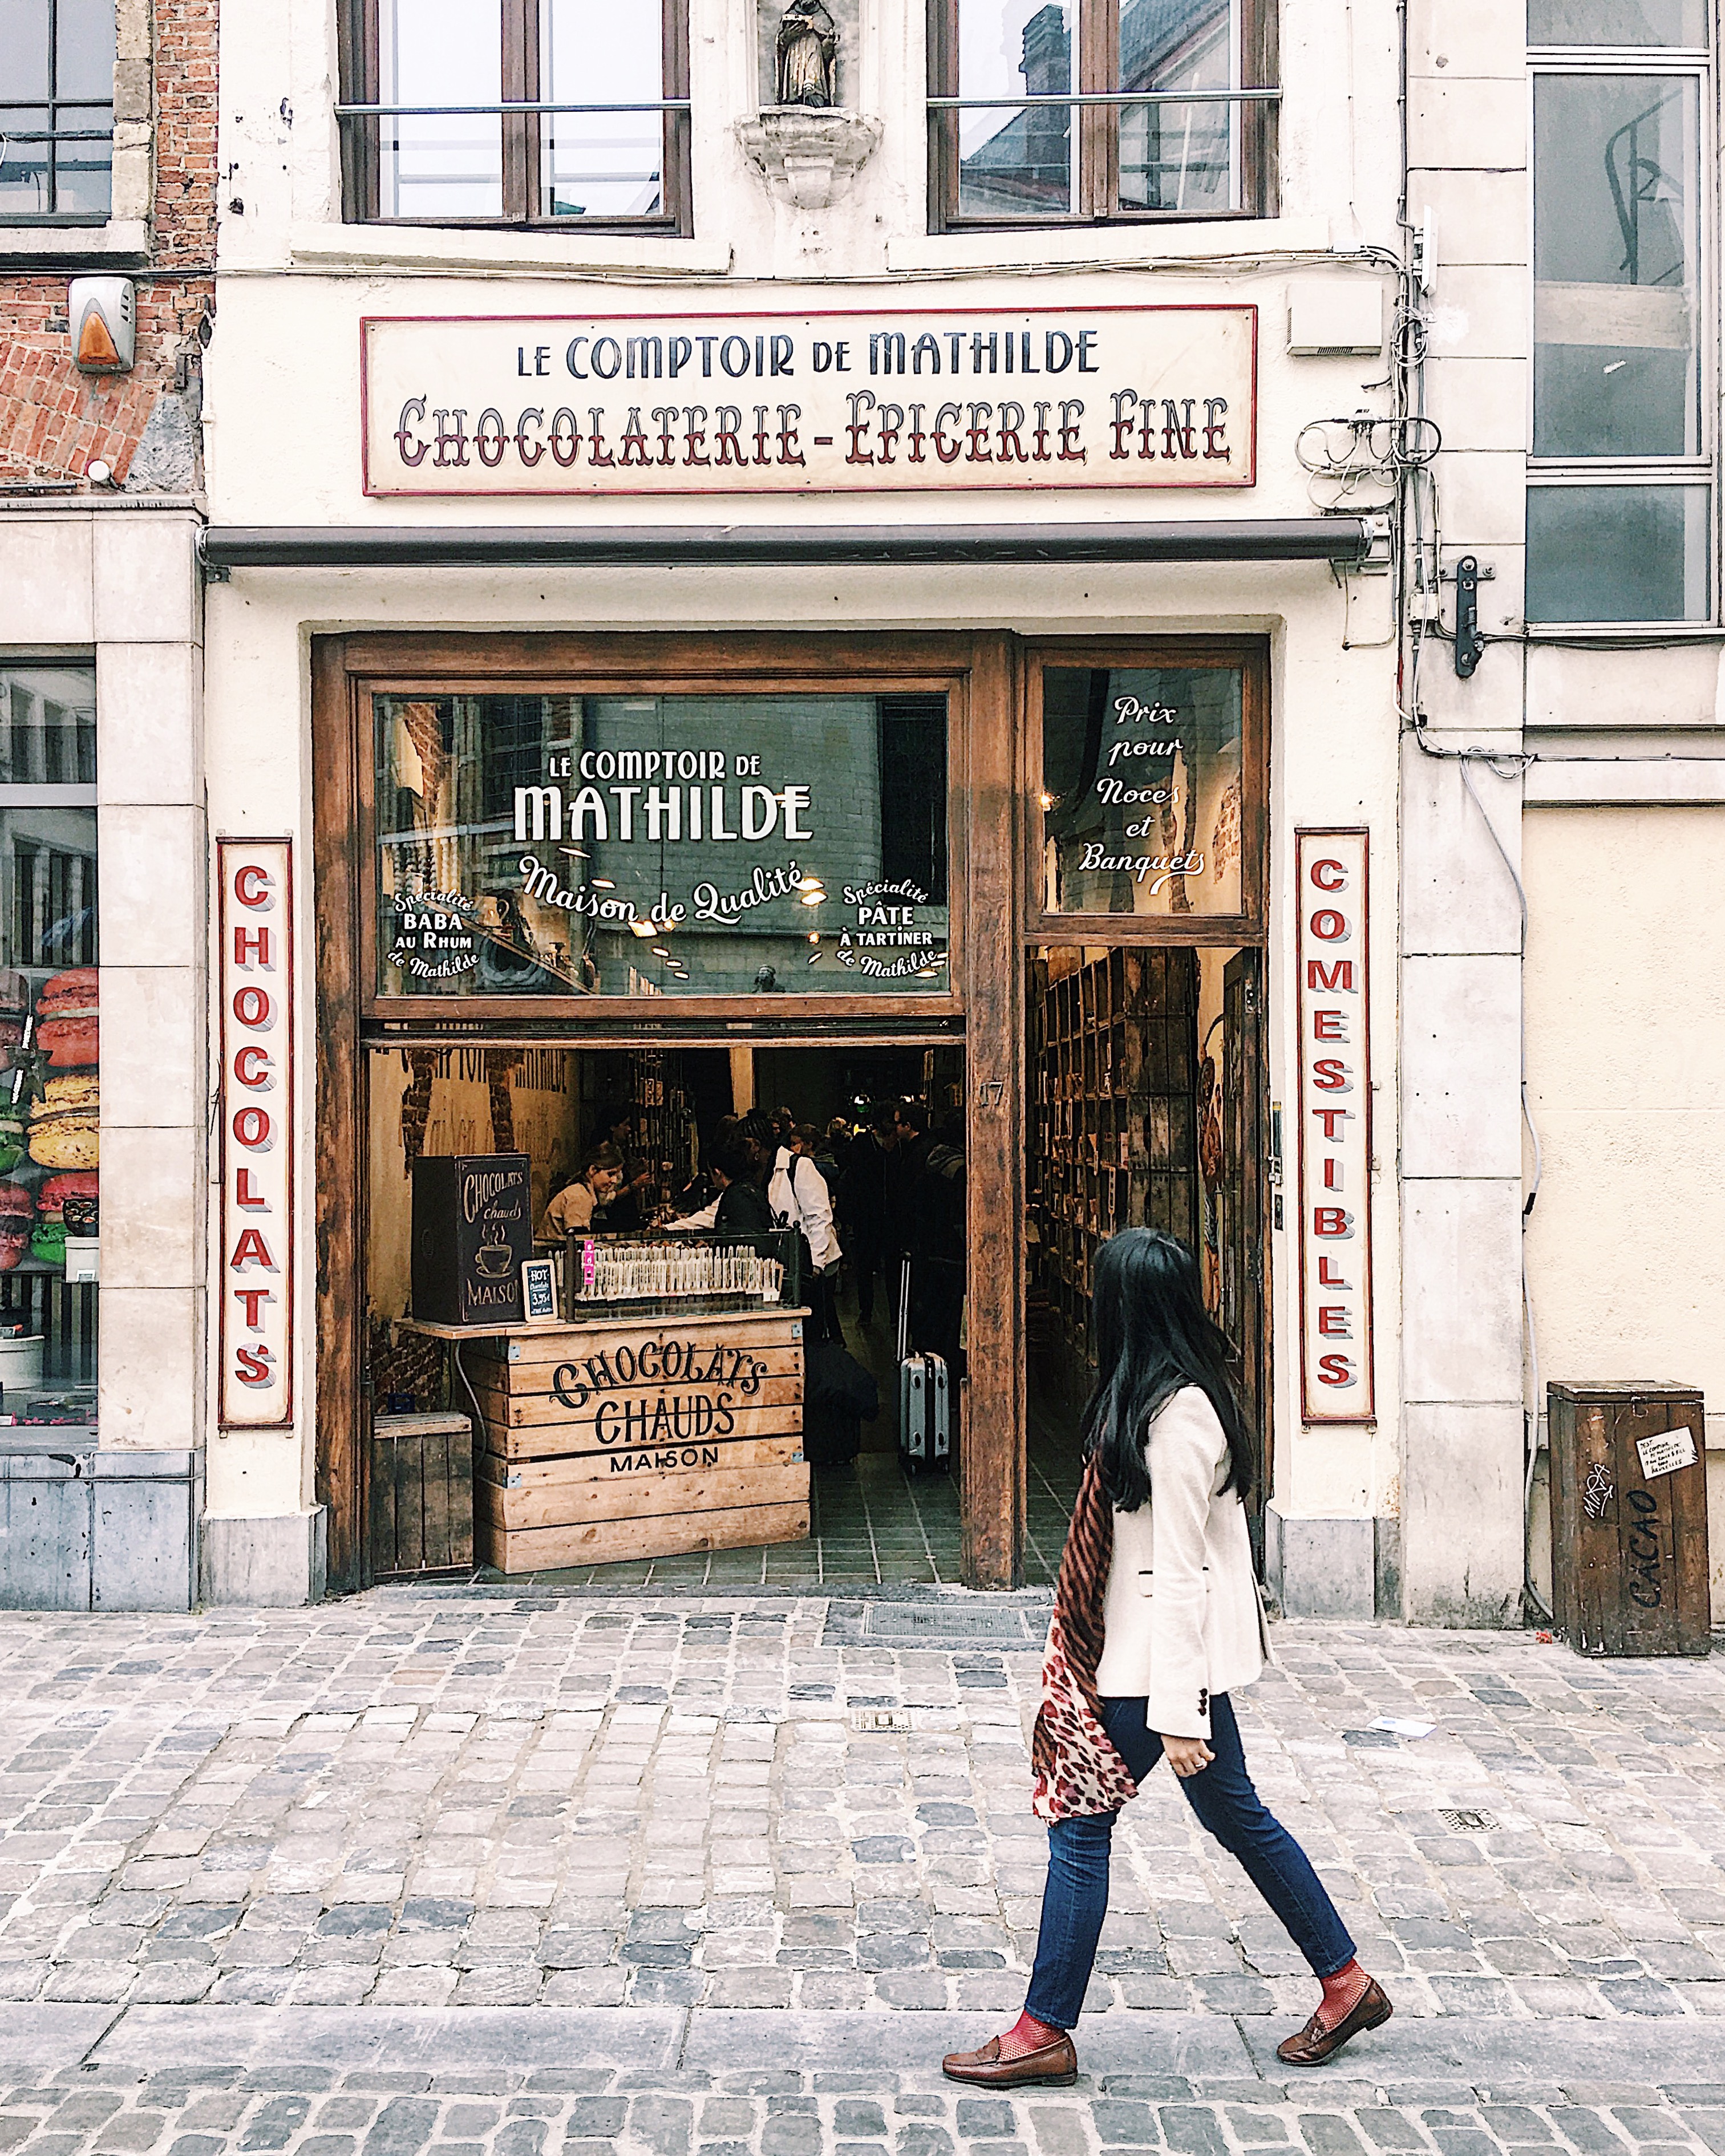 Chocolate shops in brussels